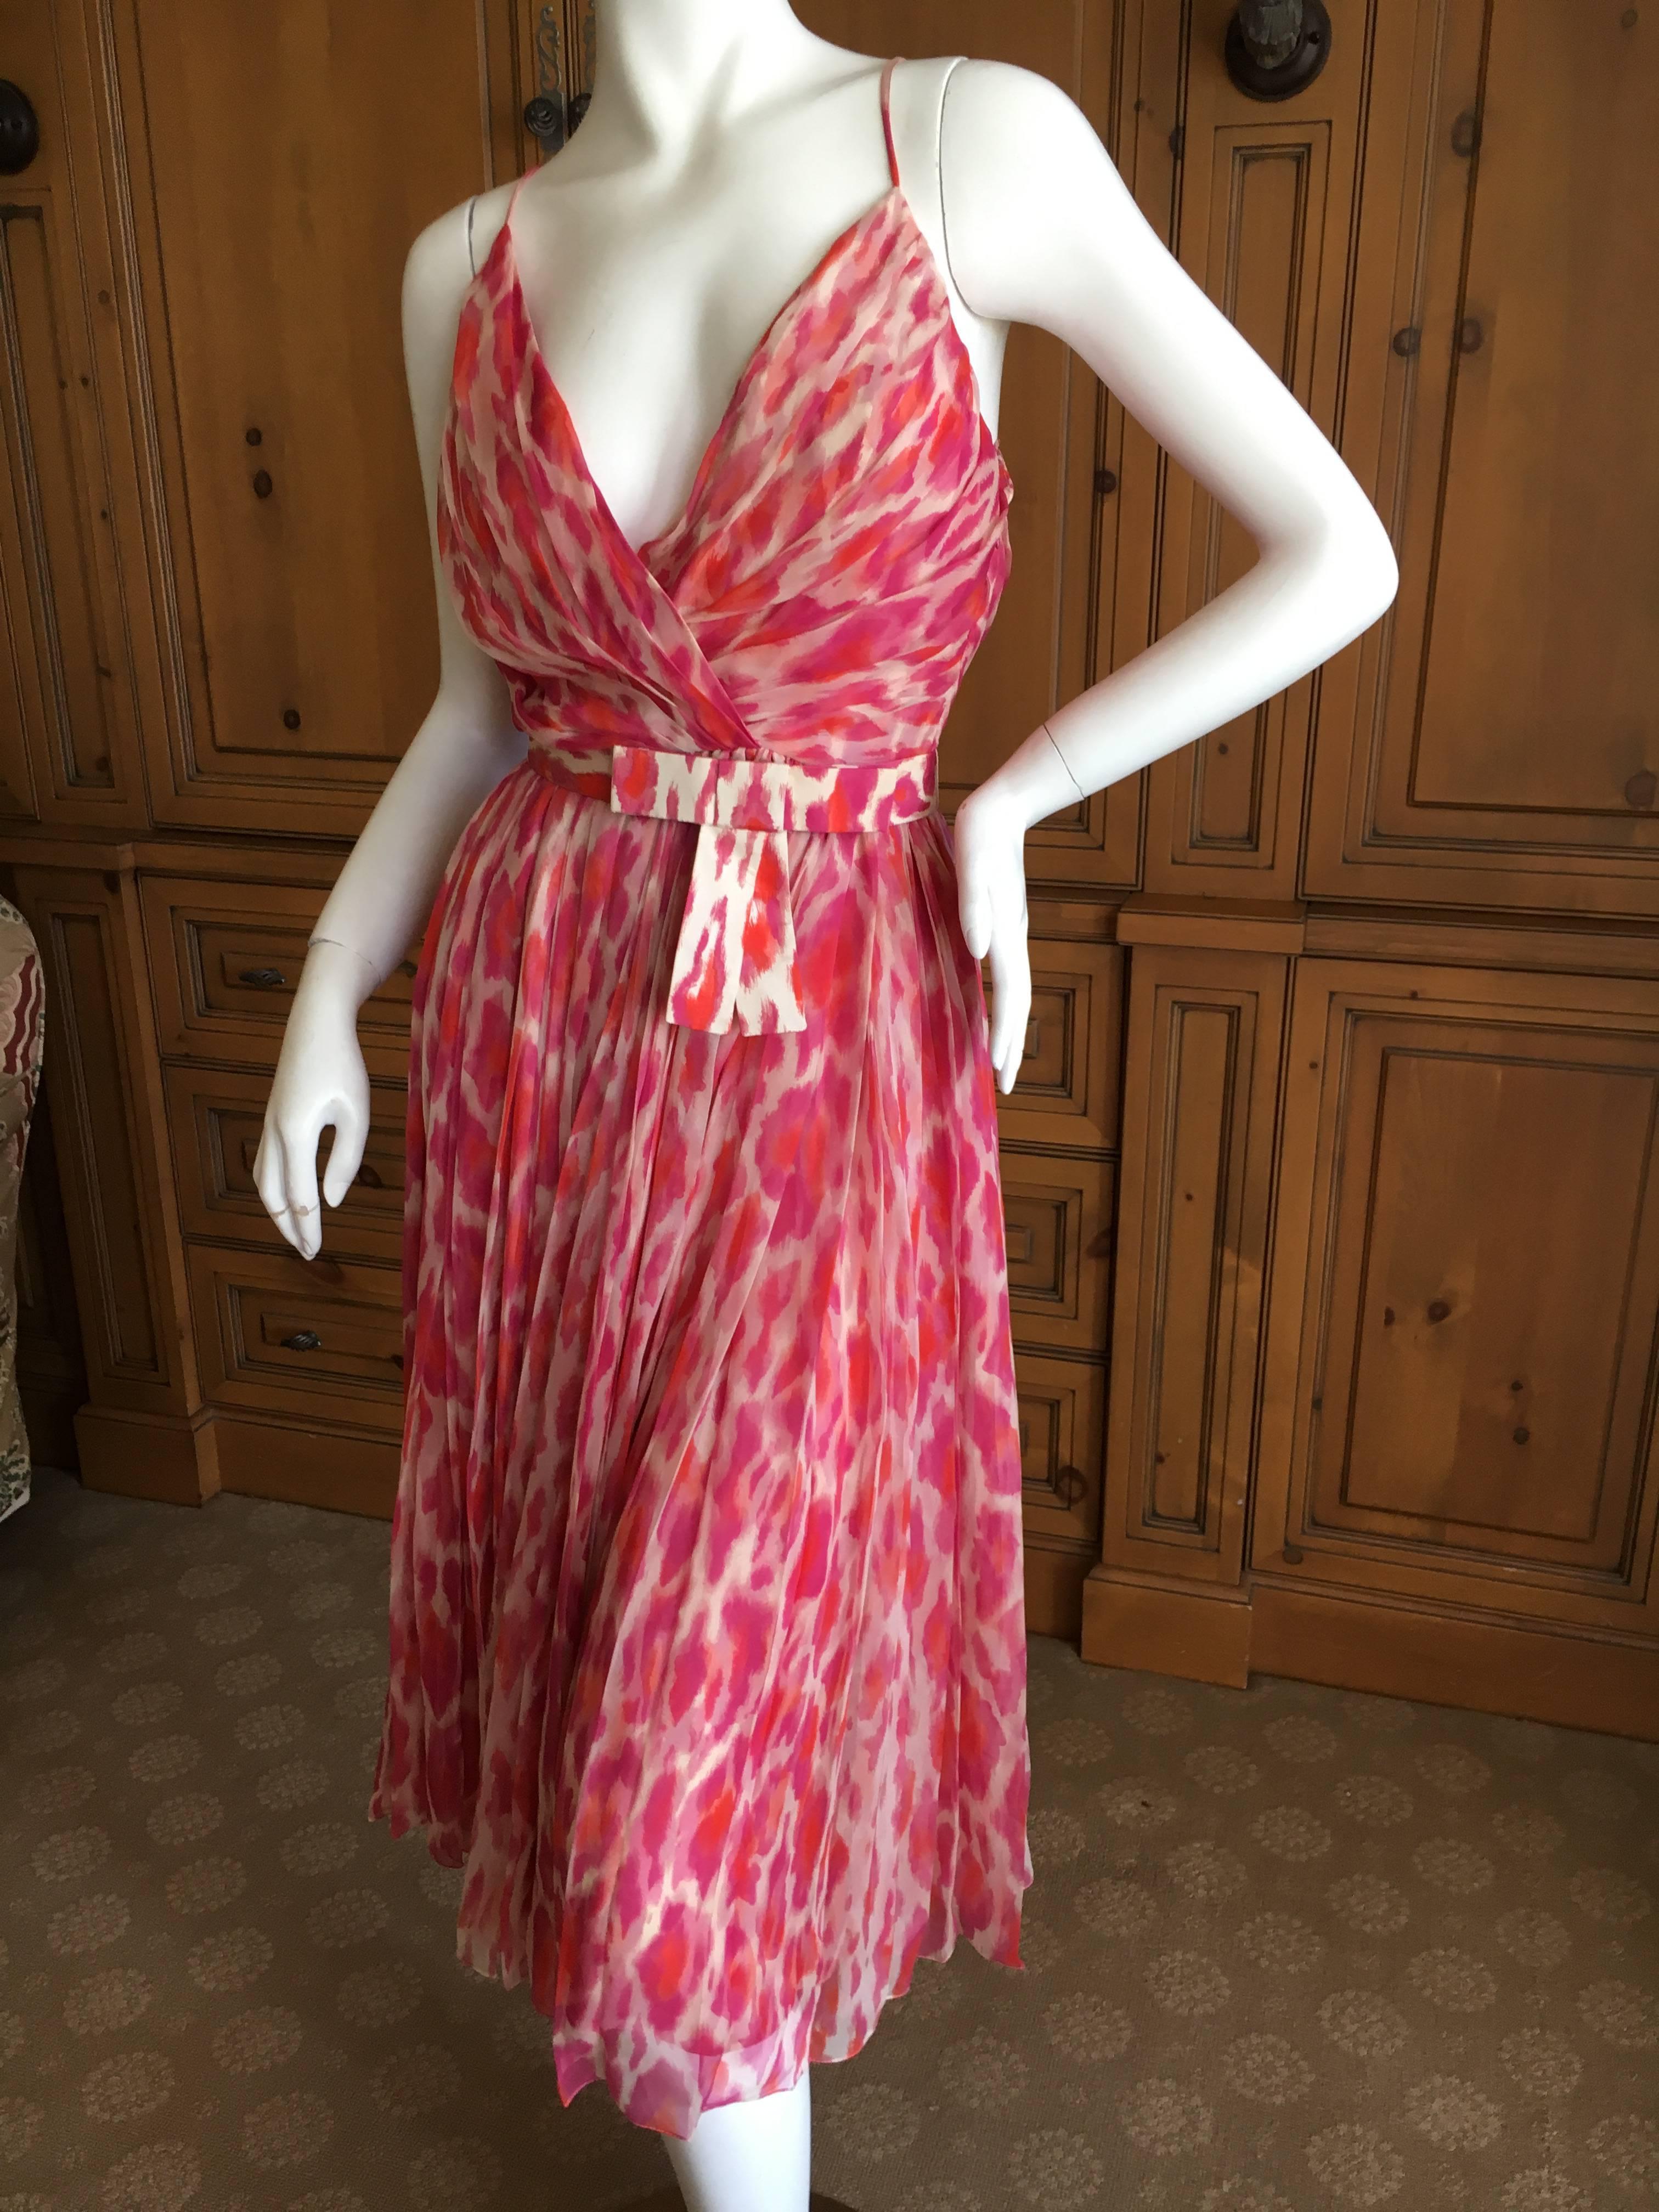 Christian Dior Rose Leopard Print Belted Dress by Galliano For Sale 2